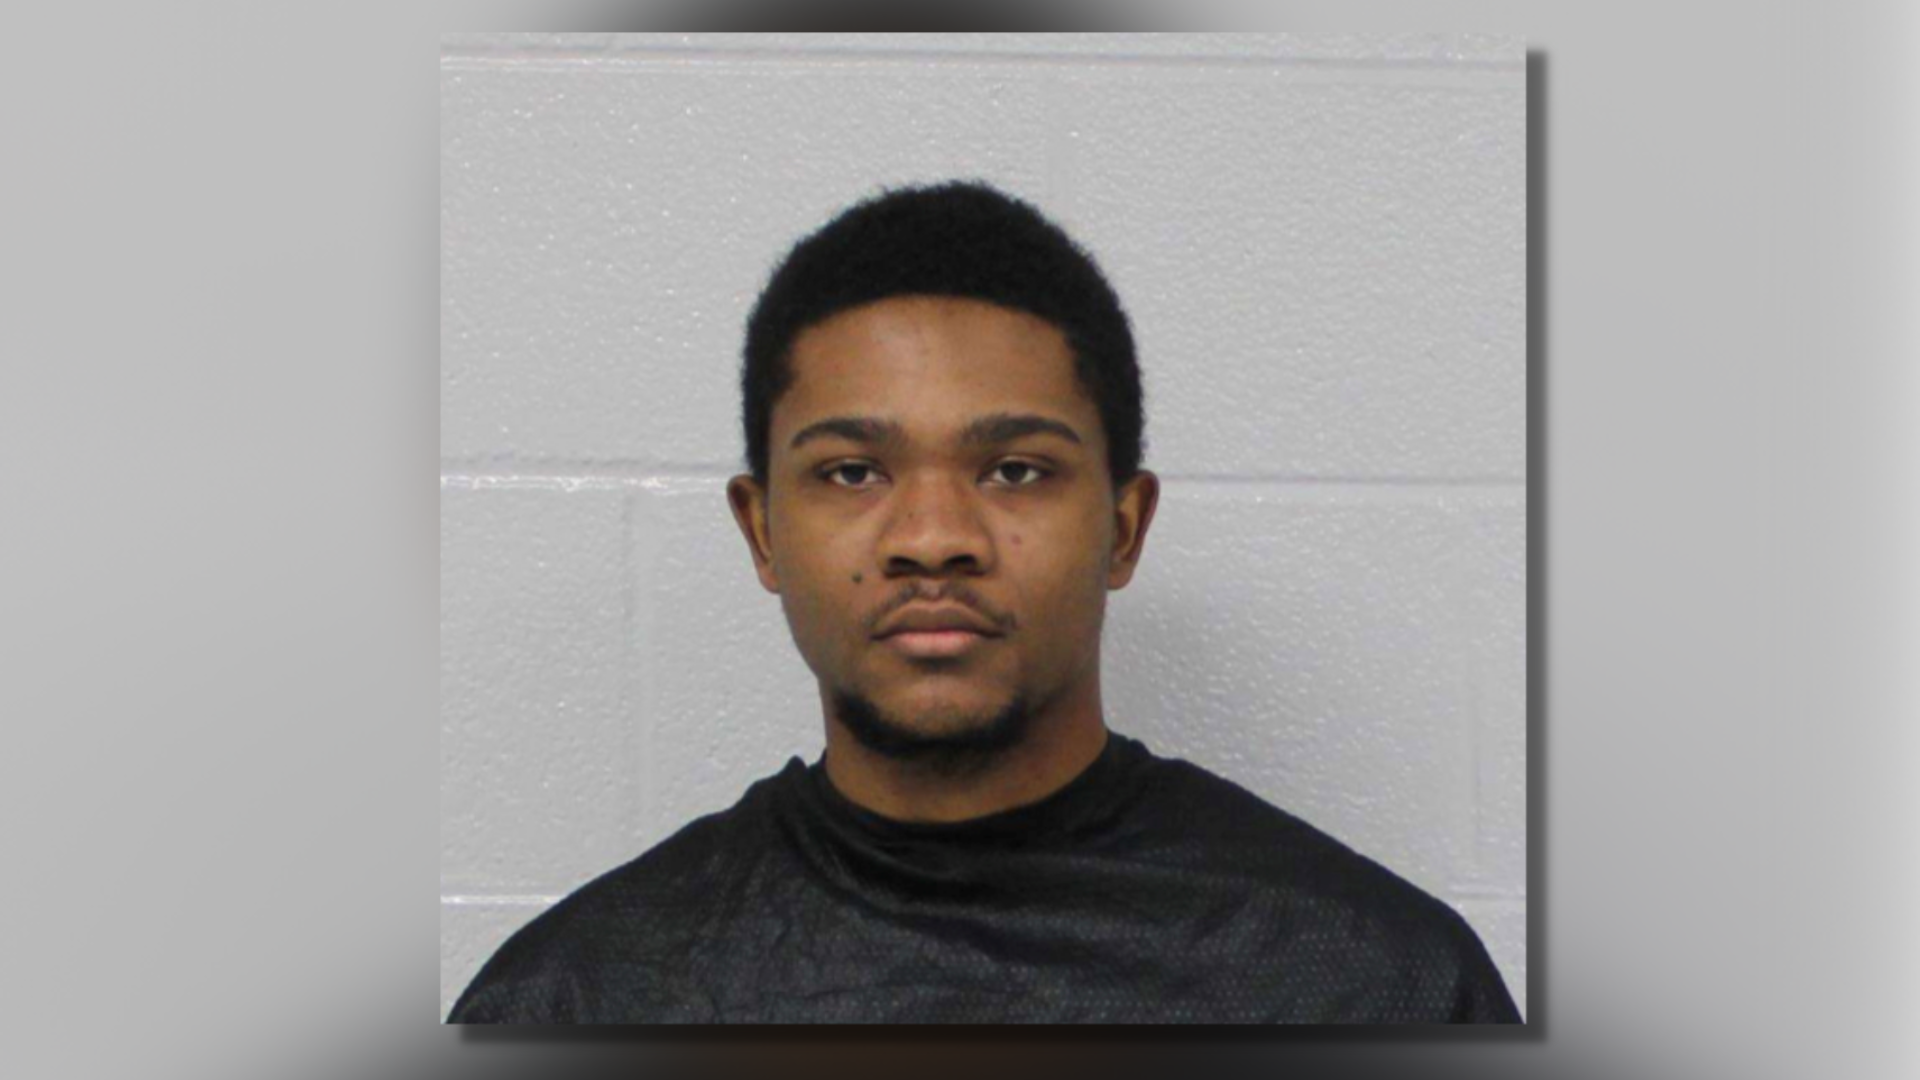 23-year-old Carroll County man arrested on child porn charges â€“ WSB-TV  Channel 2 - Atlanta